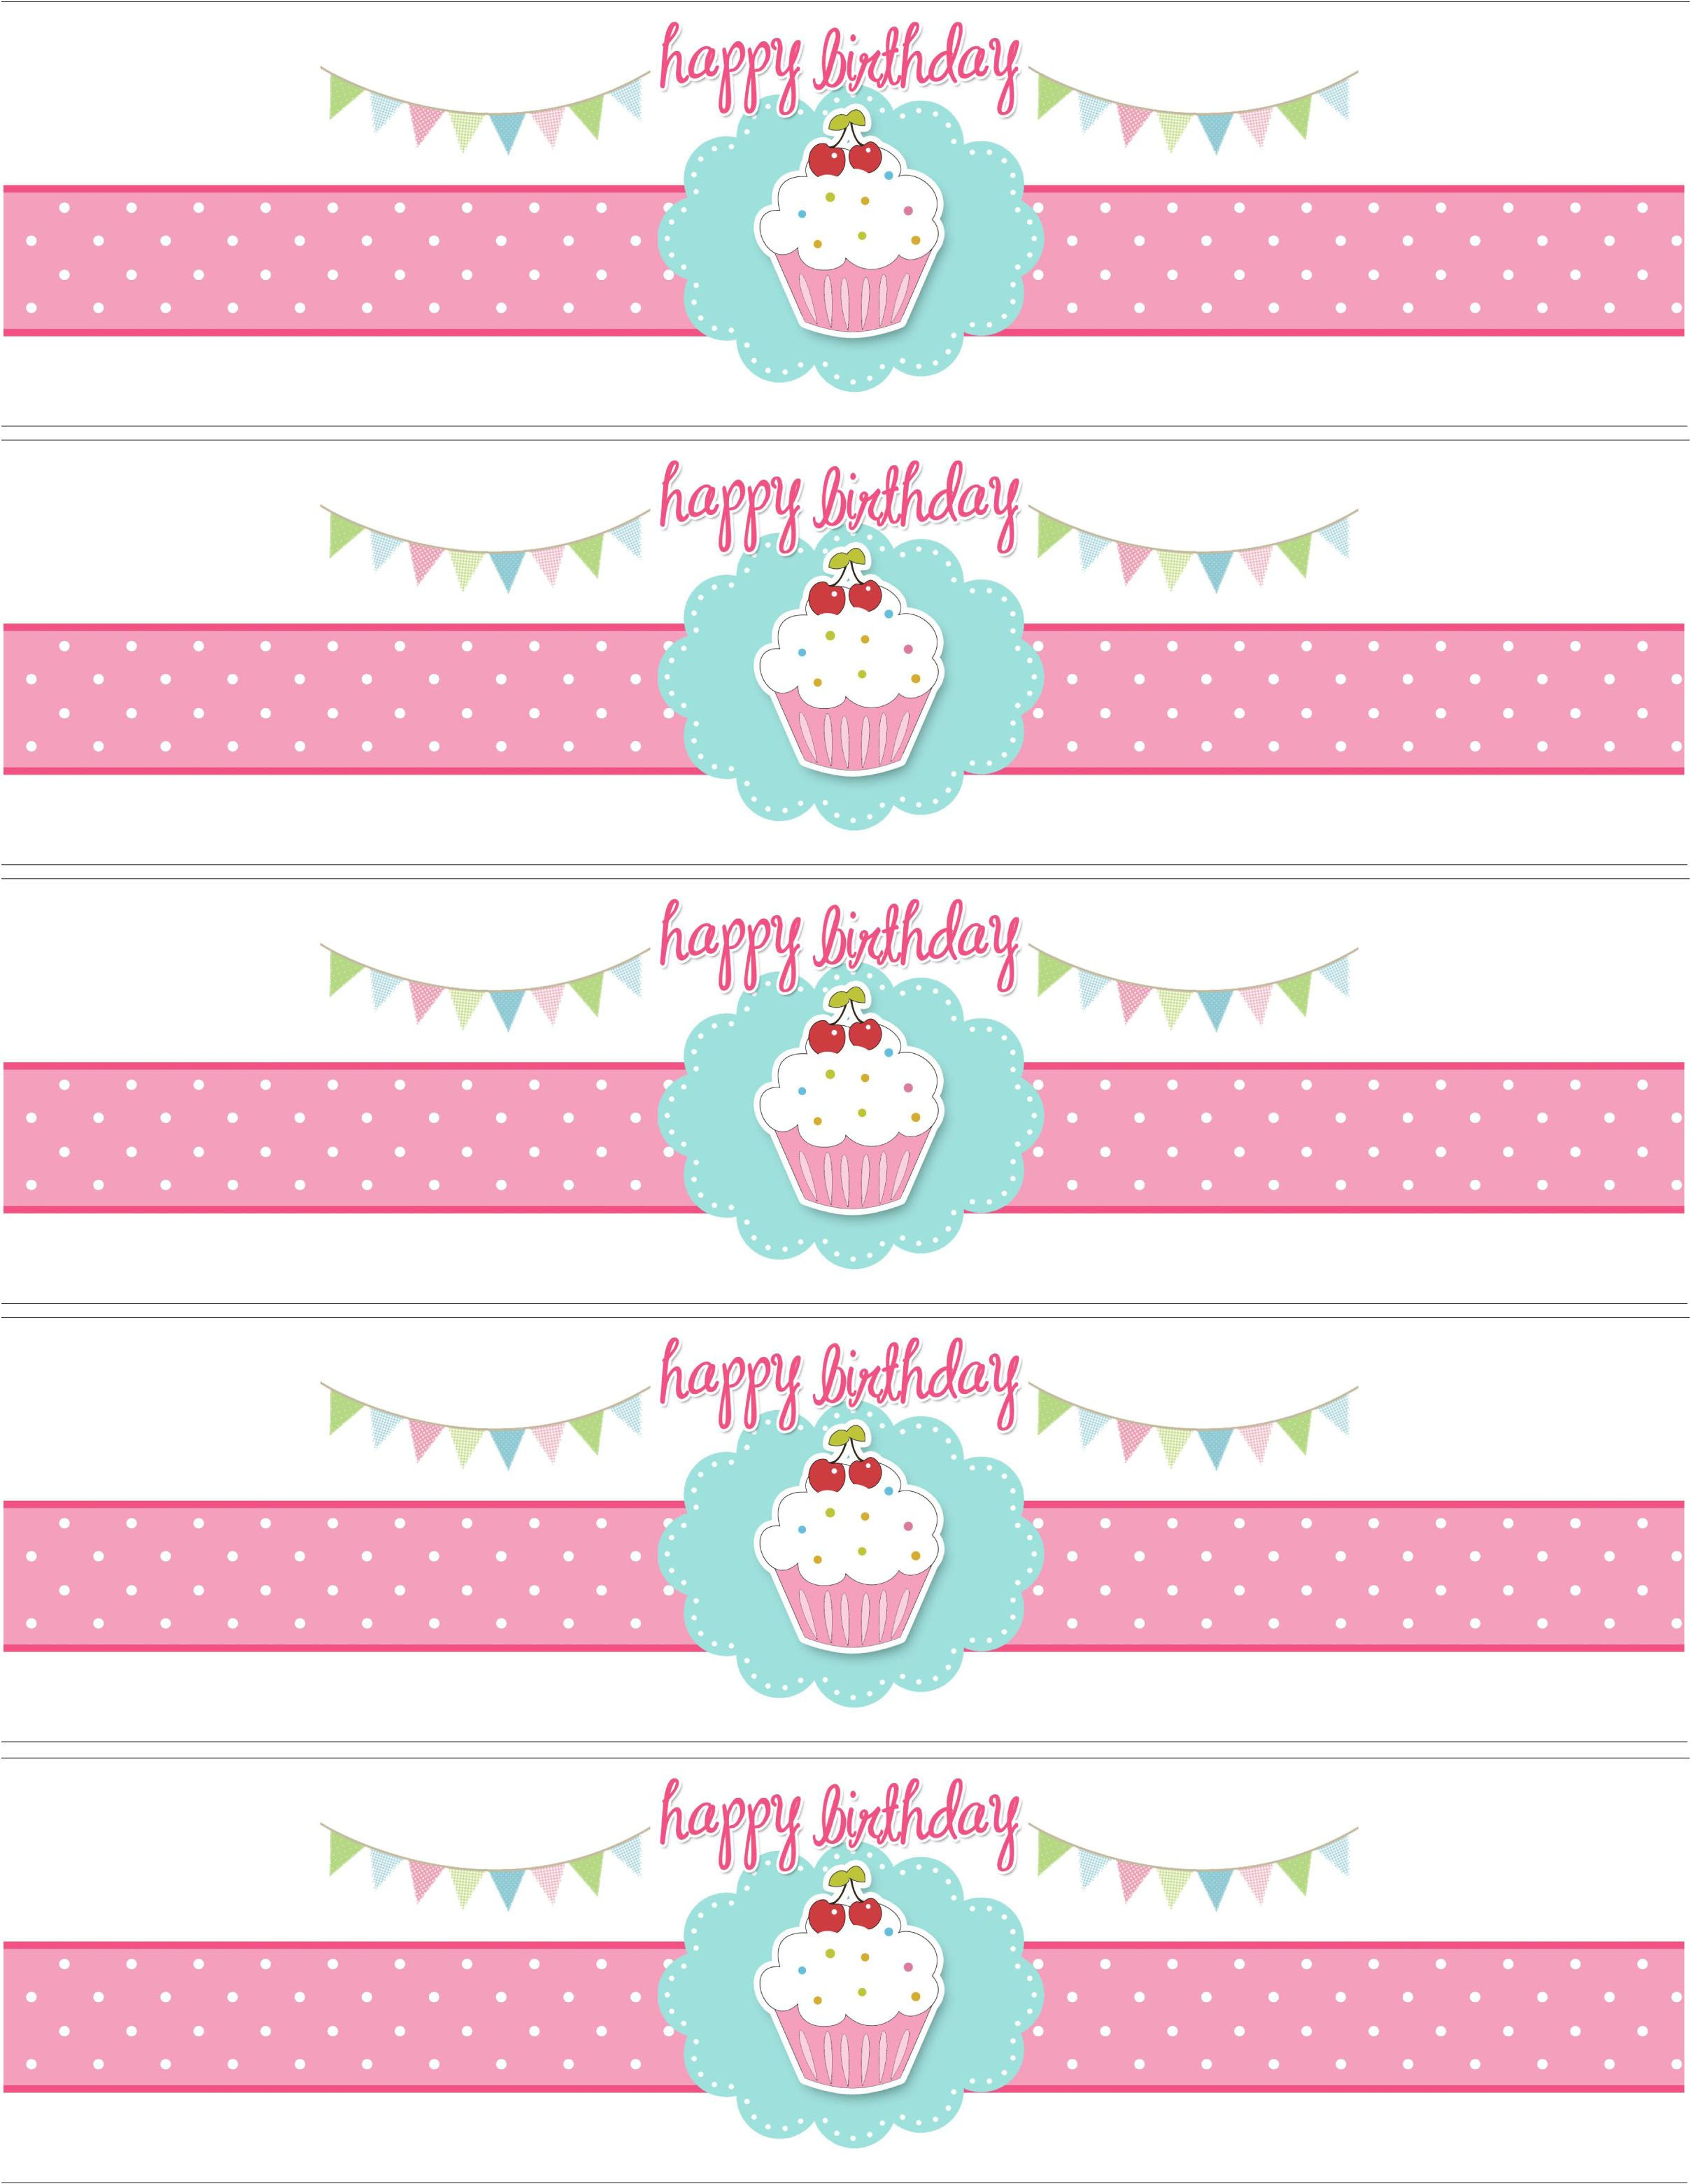 Cupcake Birthday Party With Free Printables | Diy Birthday Party - Free Printable Water Bottle Label Template